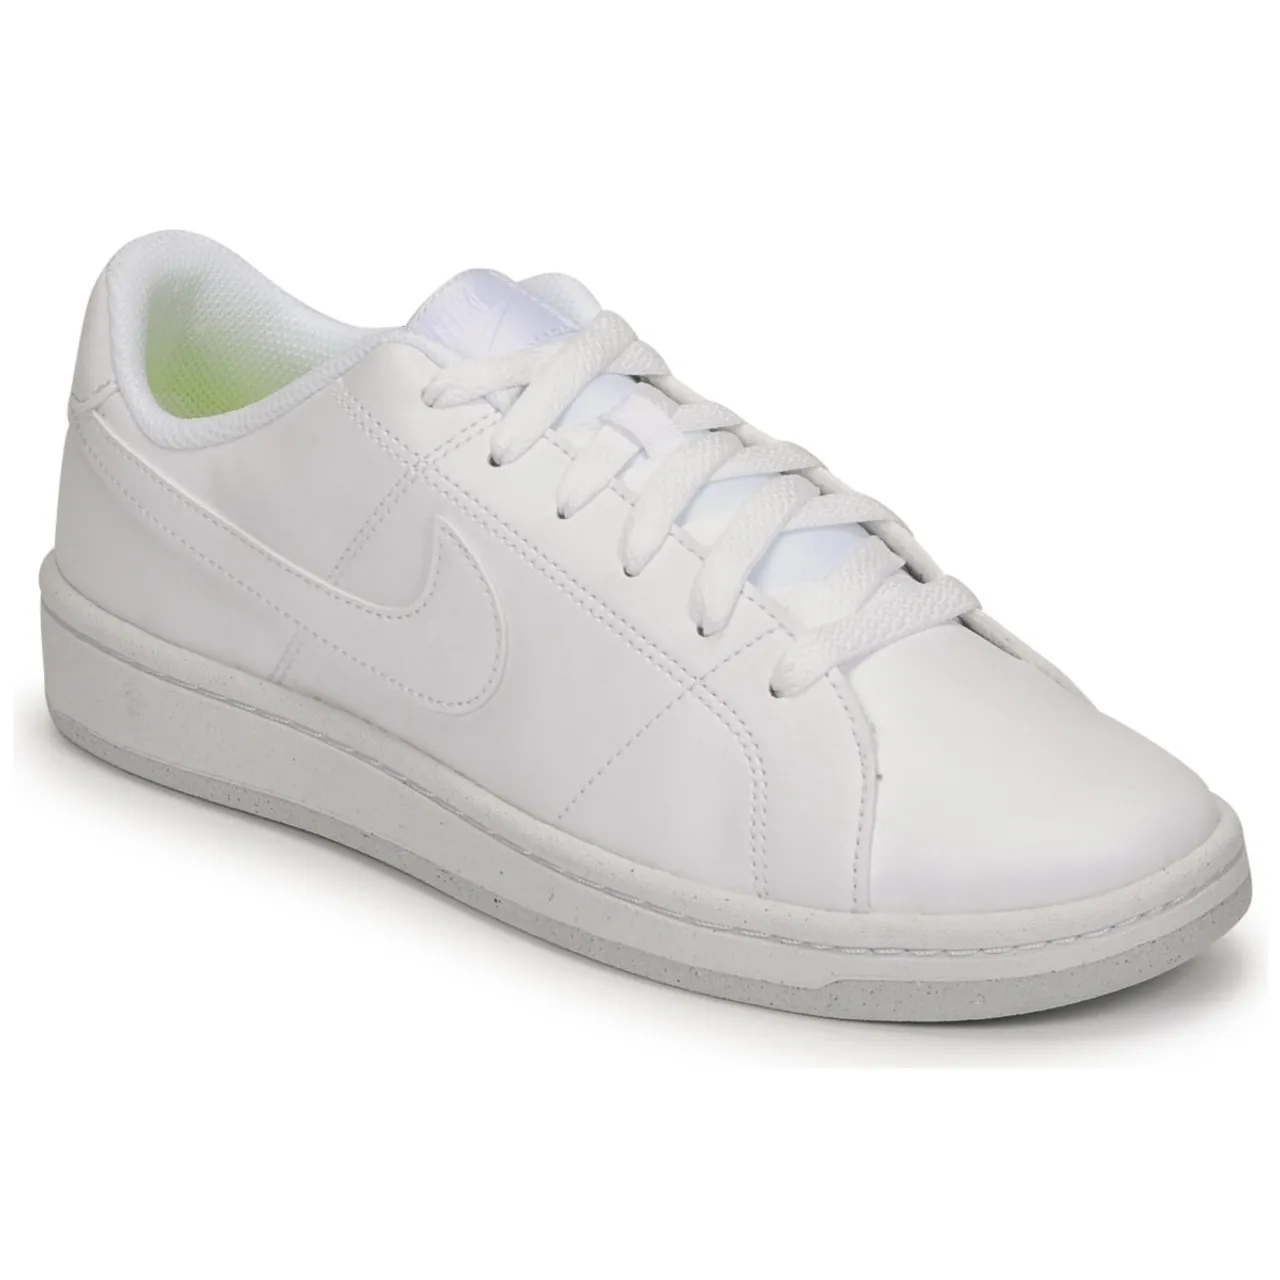 Nike  WMNS NIKE COURT ROYALE 2 NN  women's Shoes (Trainers) in White